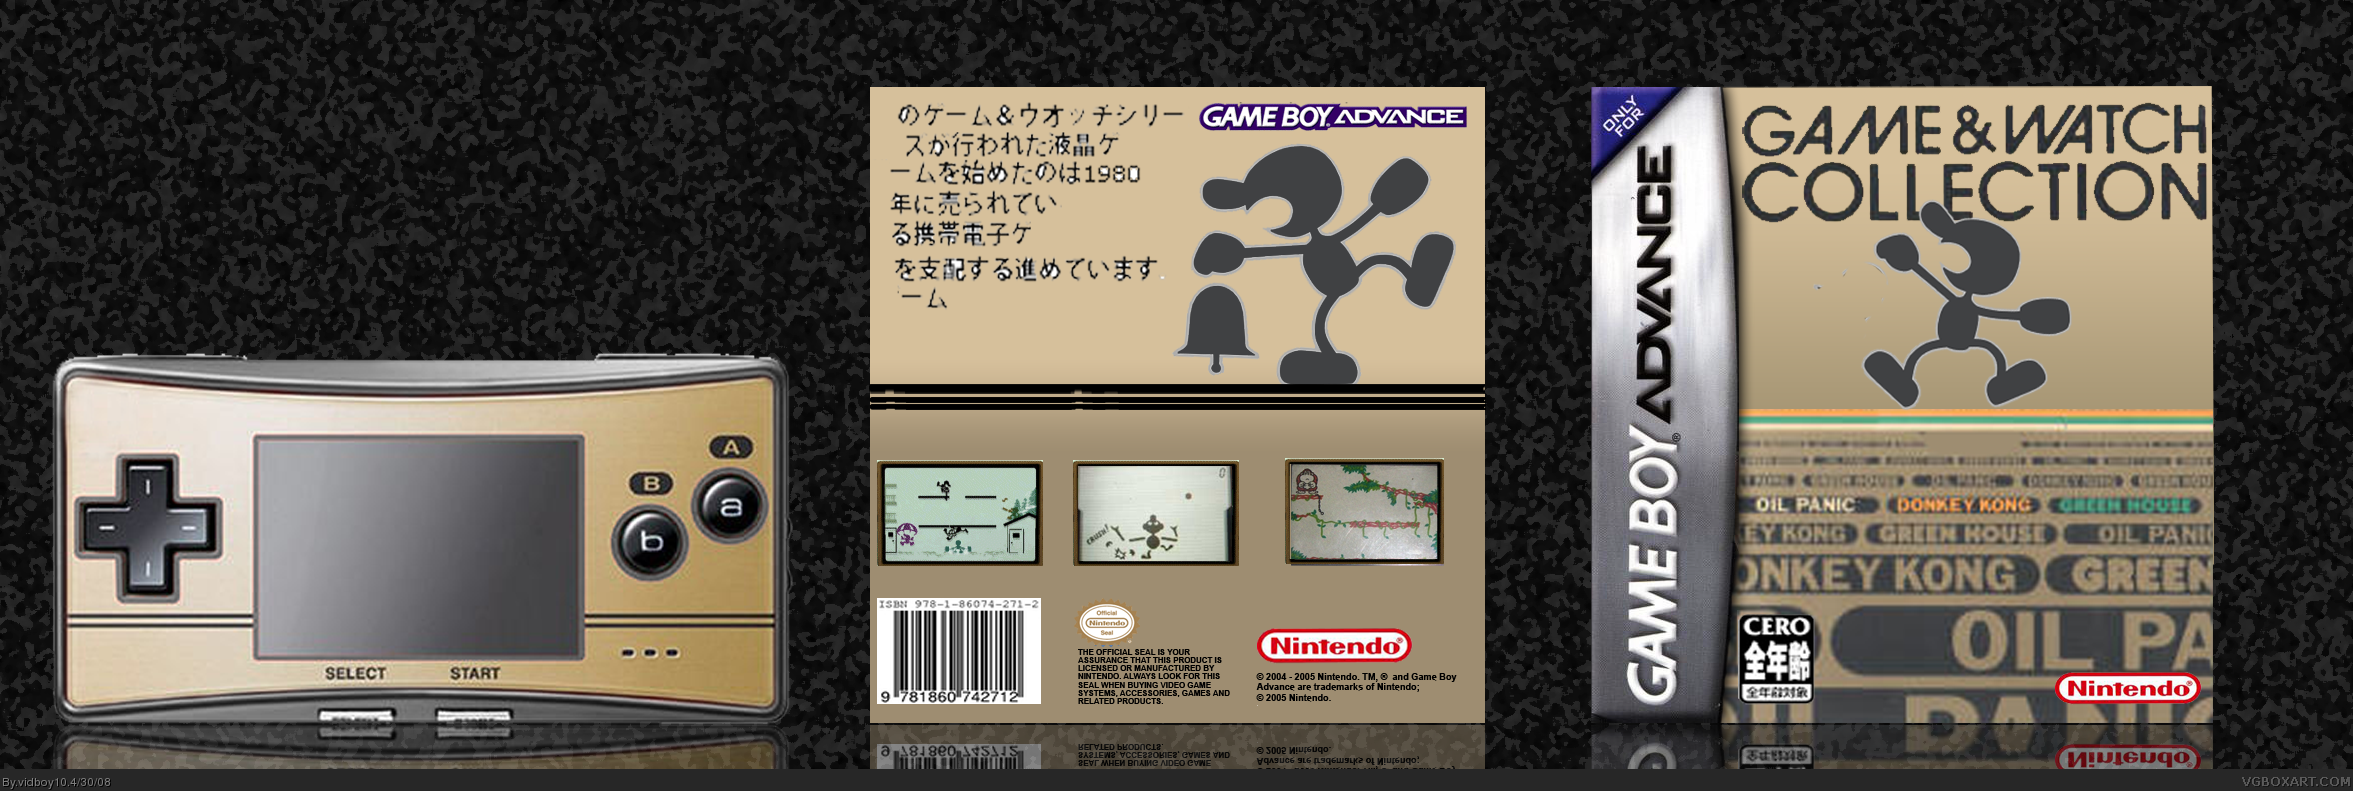 Game And Watch Collection box cover